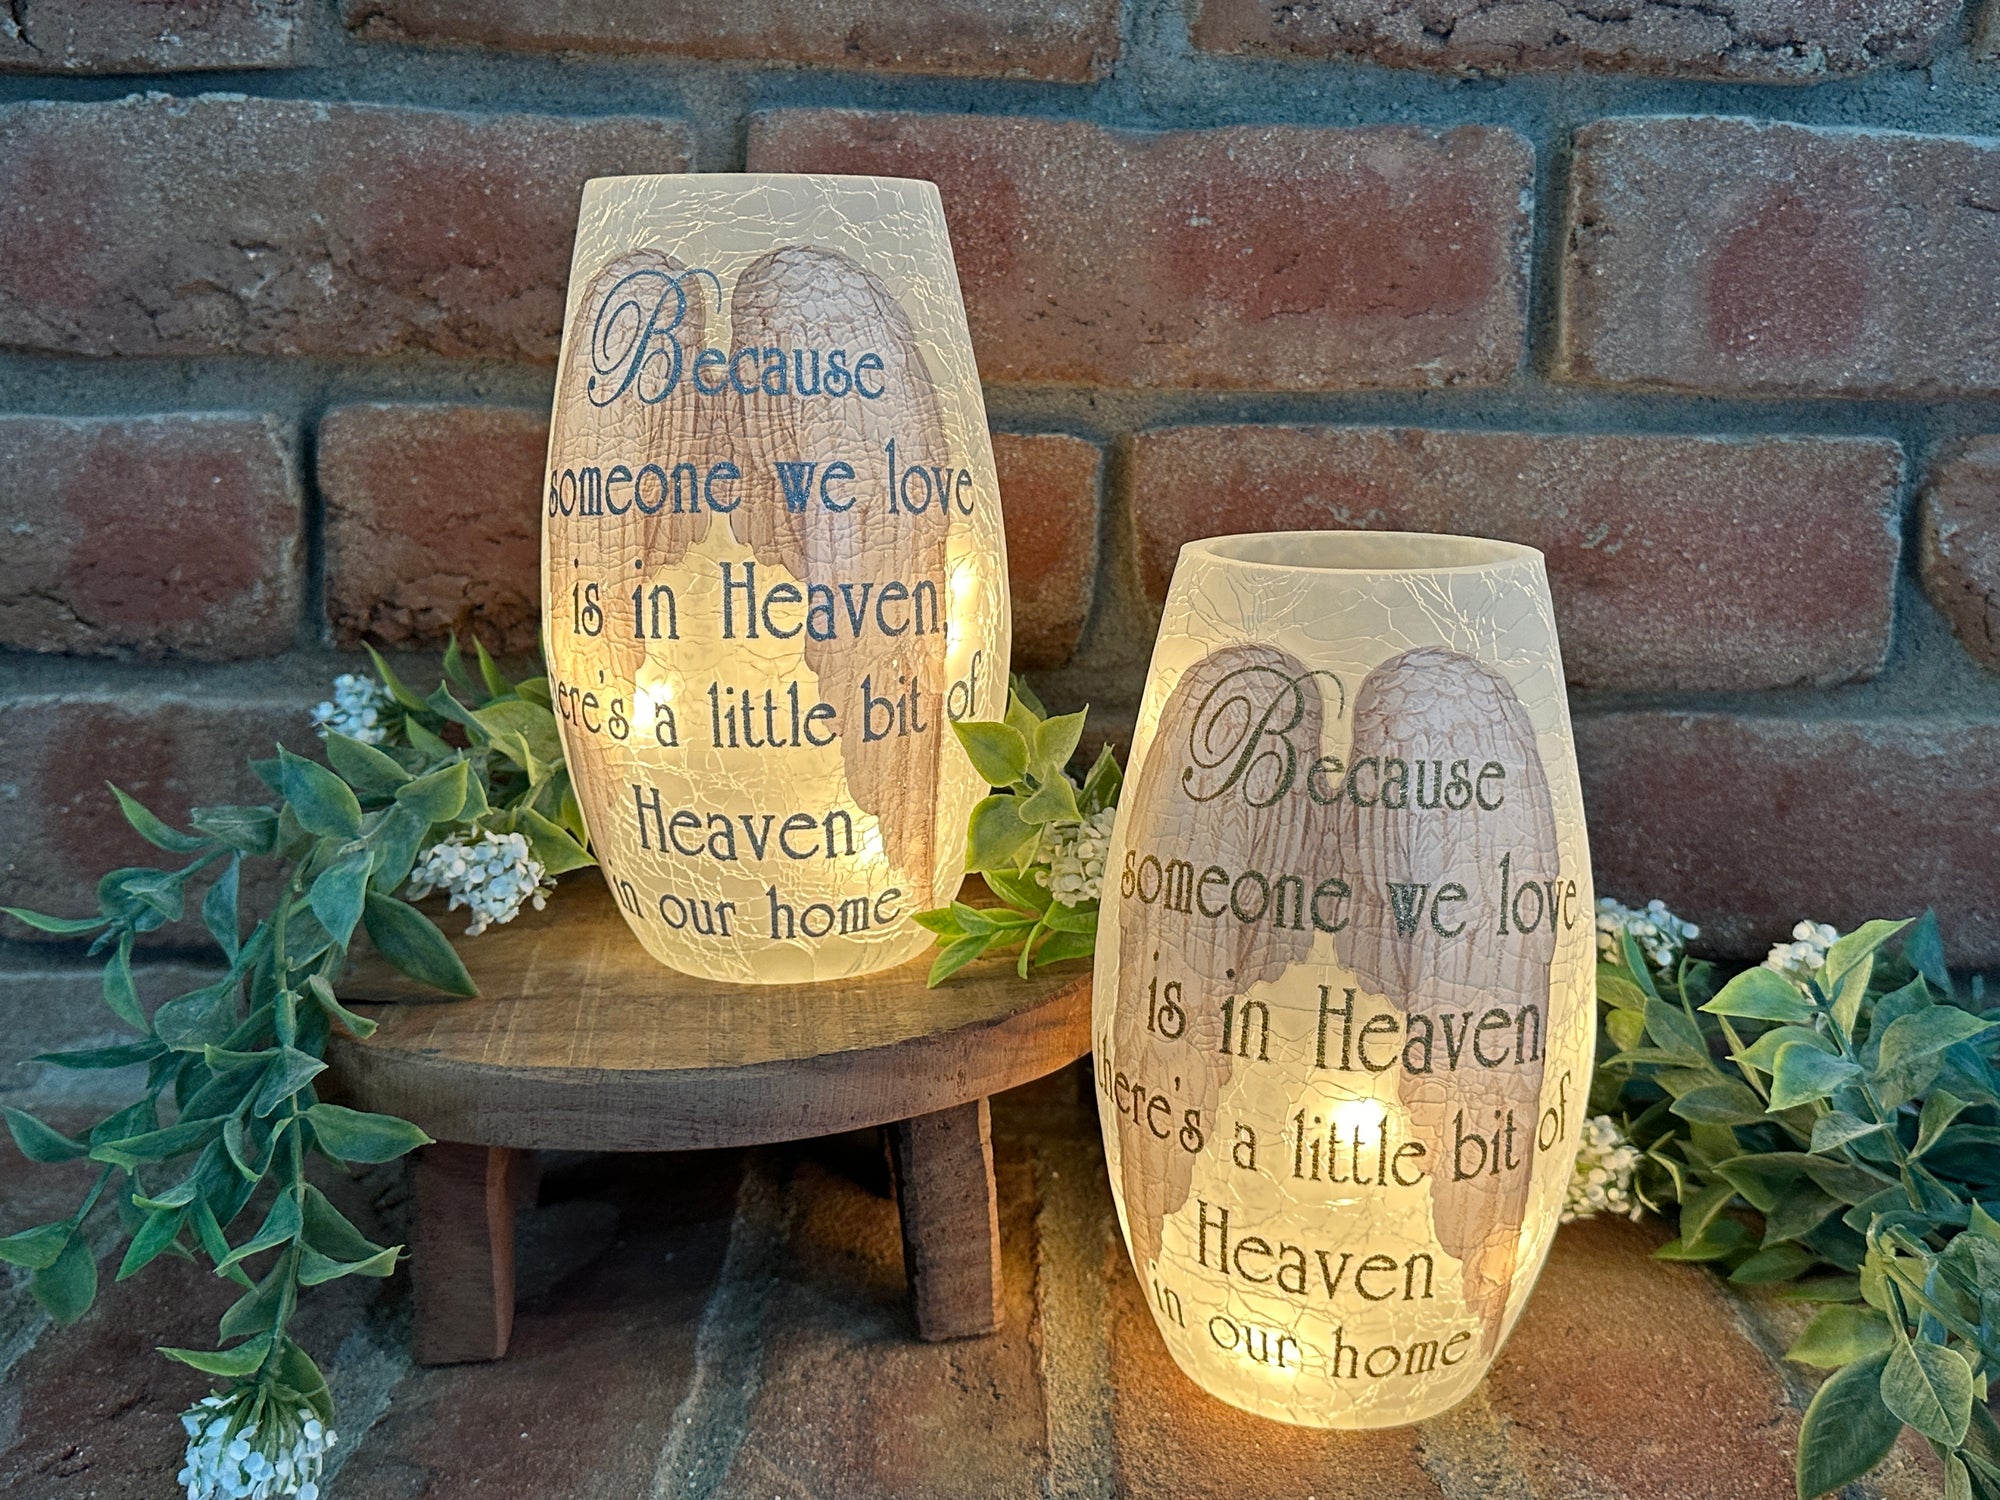 Because Someone We Love Lighted Vase - 2 Styles